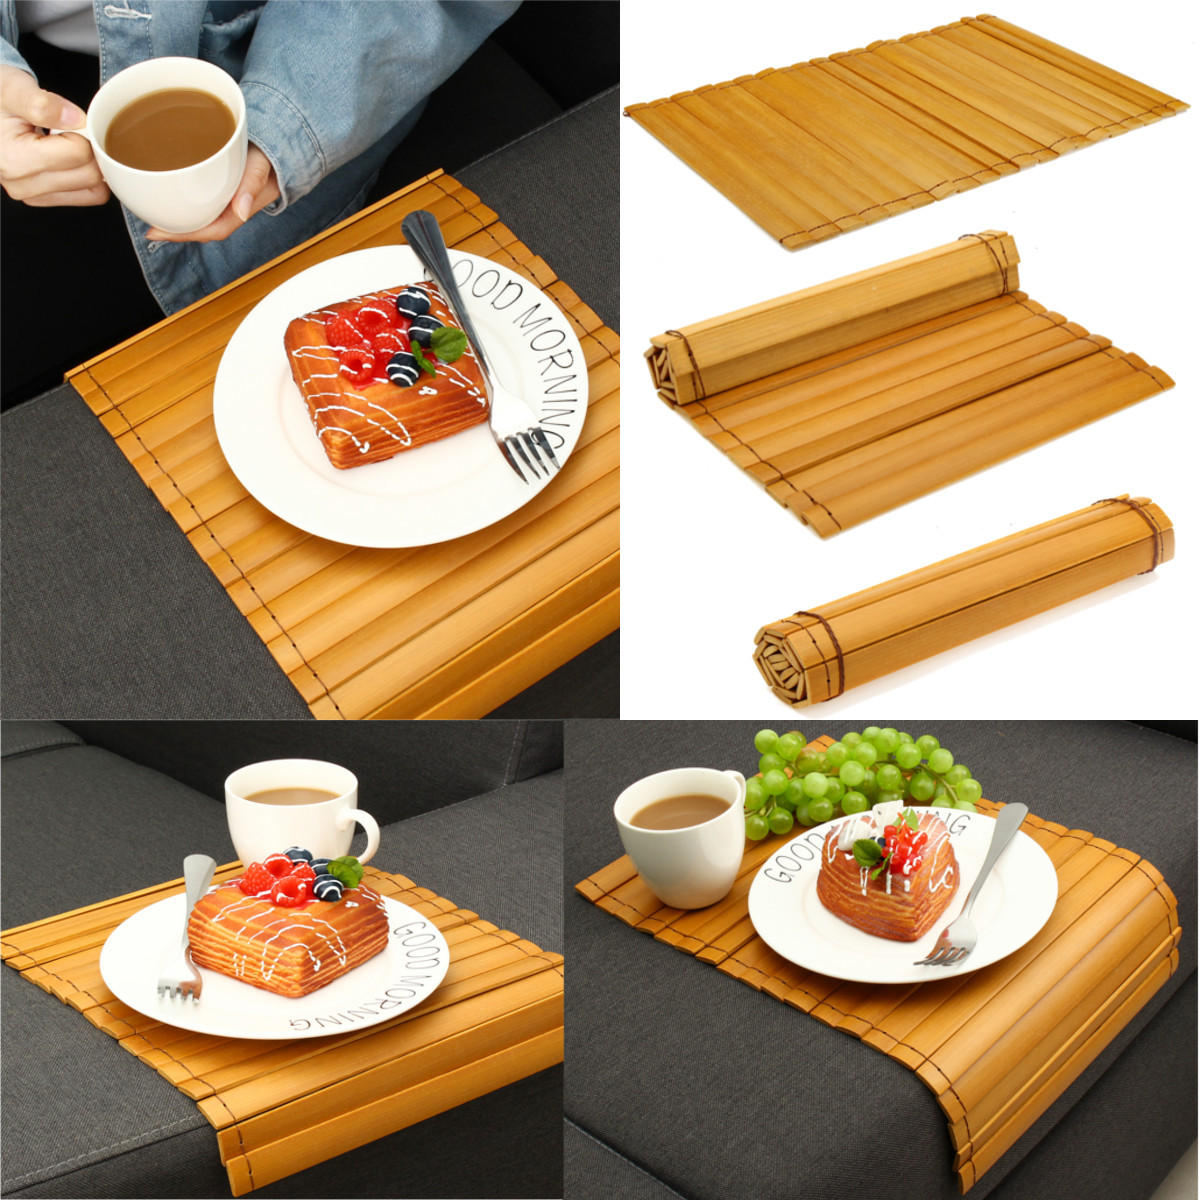 Wood Sofa Arm Rest Tray Flexible Couch Placemat Bamboo Foldable Snack Holder Table Pad